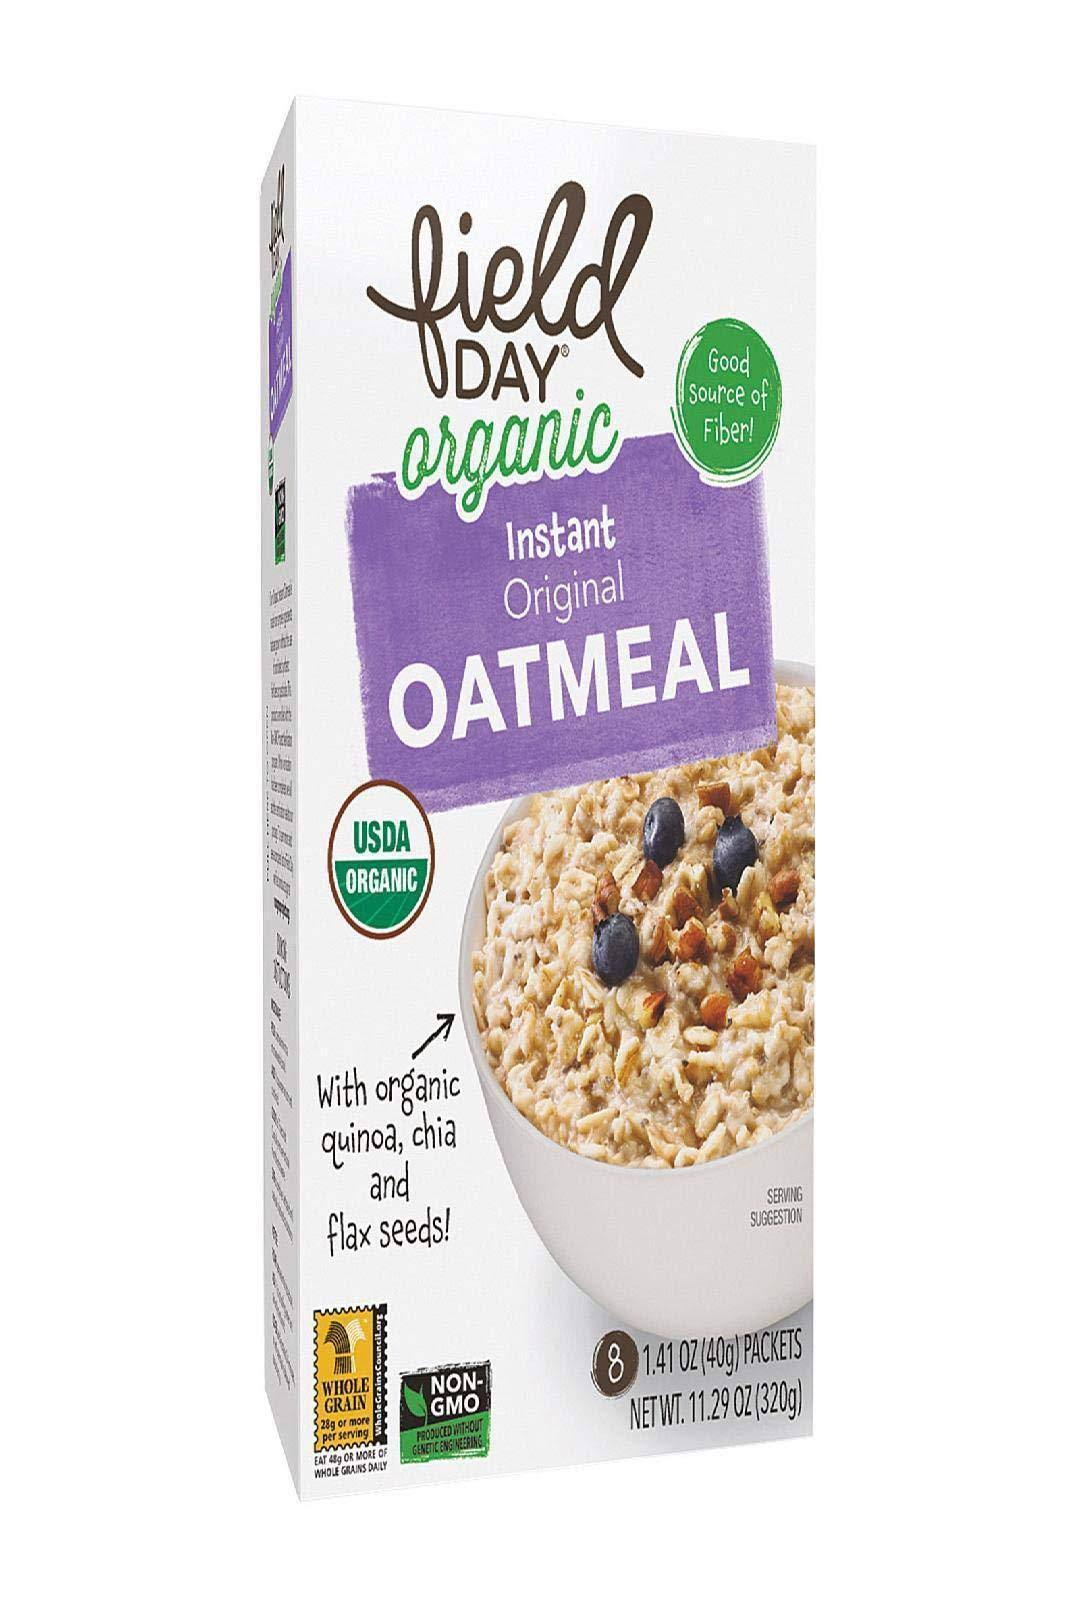 Field Day, Inst Oatmeal, OG2, Original, Pack of 6, Size - 330ml, Quantity - 1 Case